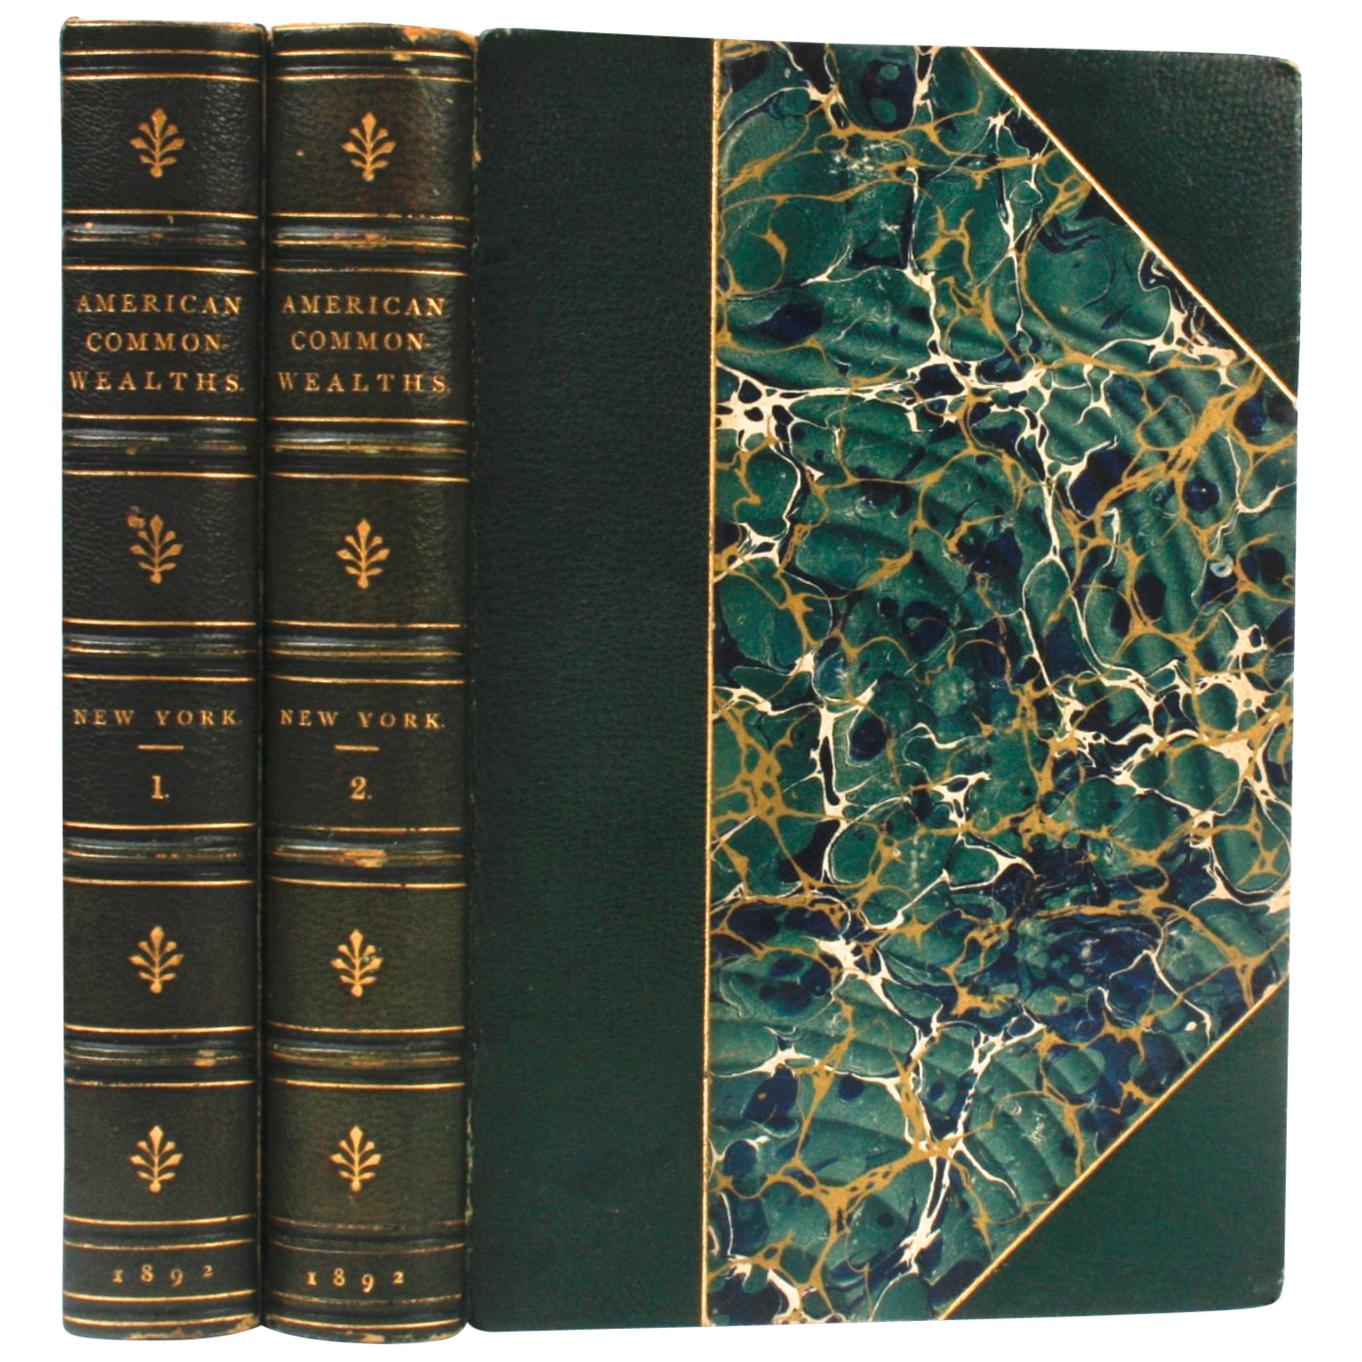 American Commonwealths, New York in Two Volumes